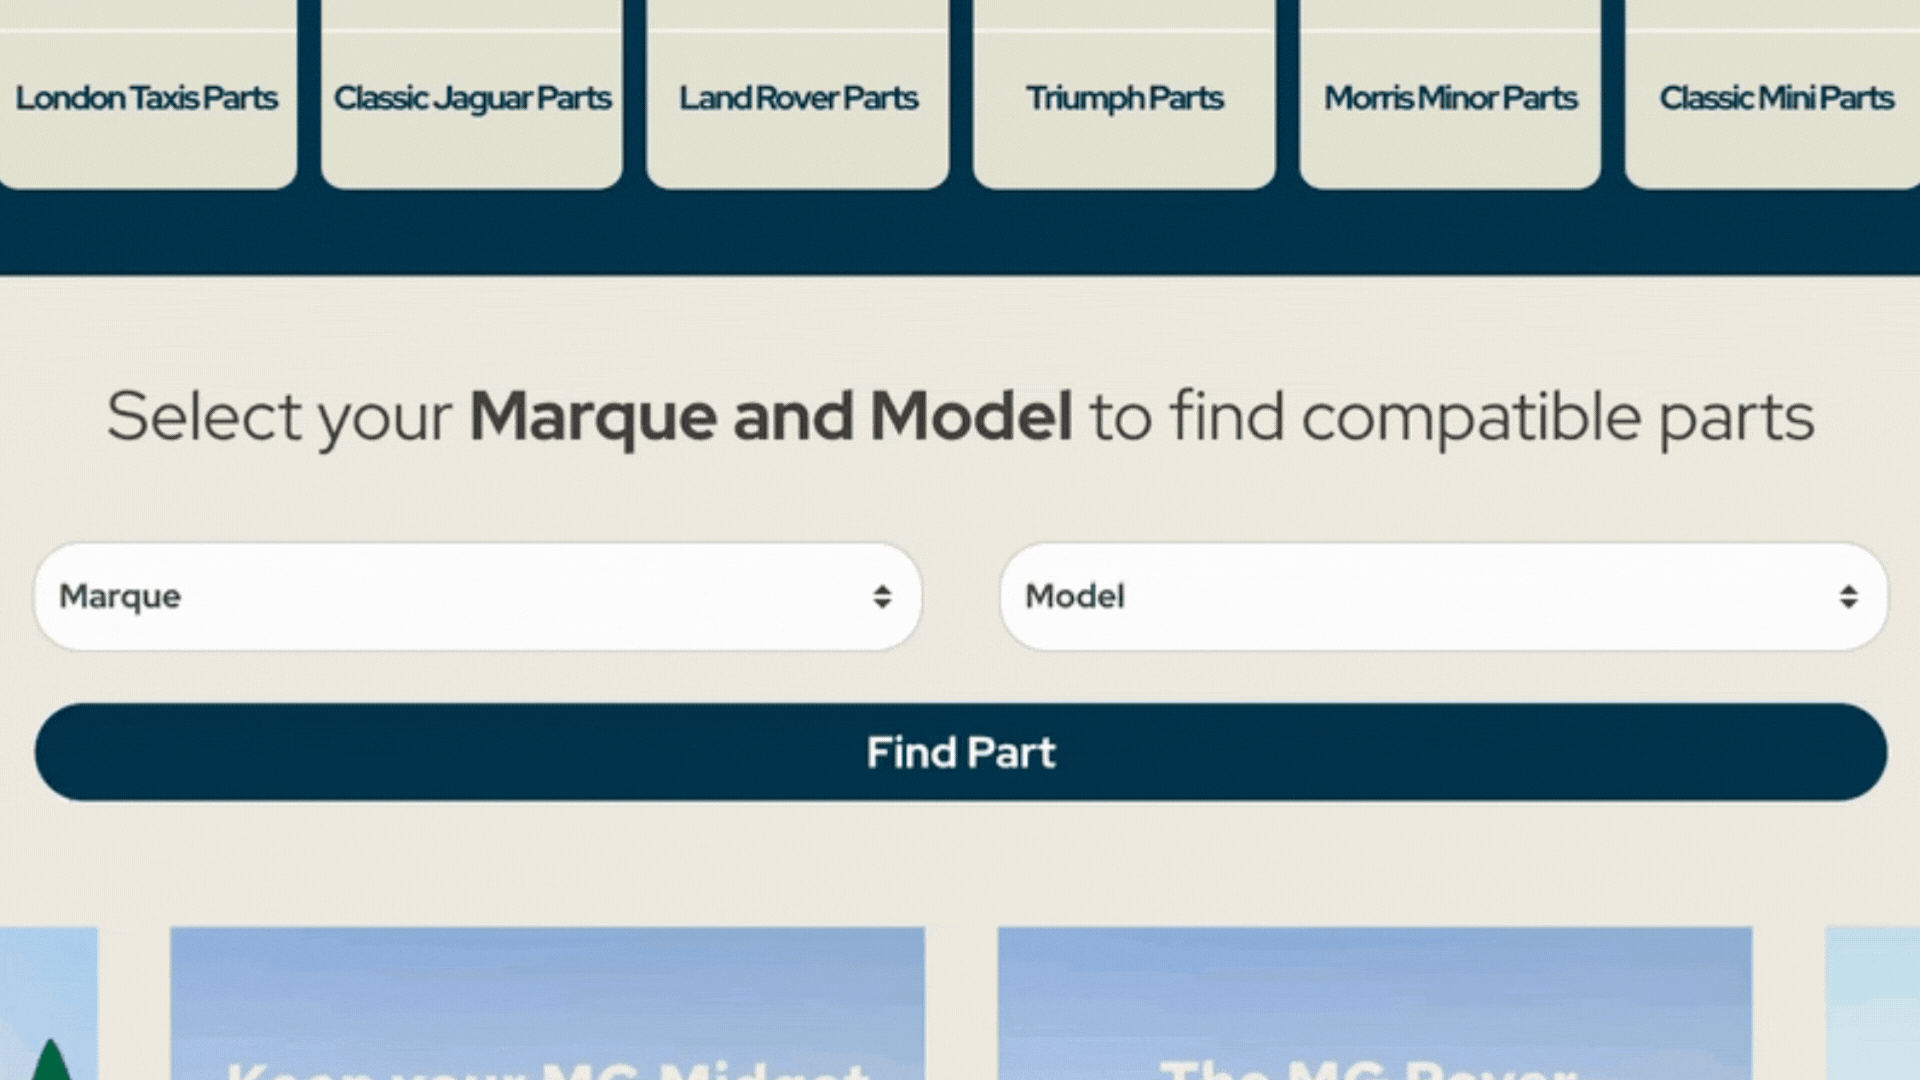 Motaclan part finder, as implemented by eCommerce agency, magic42